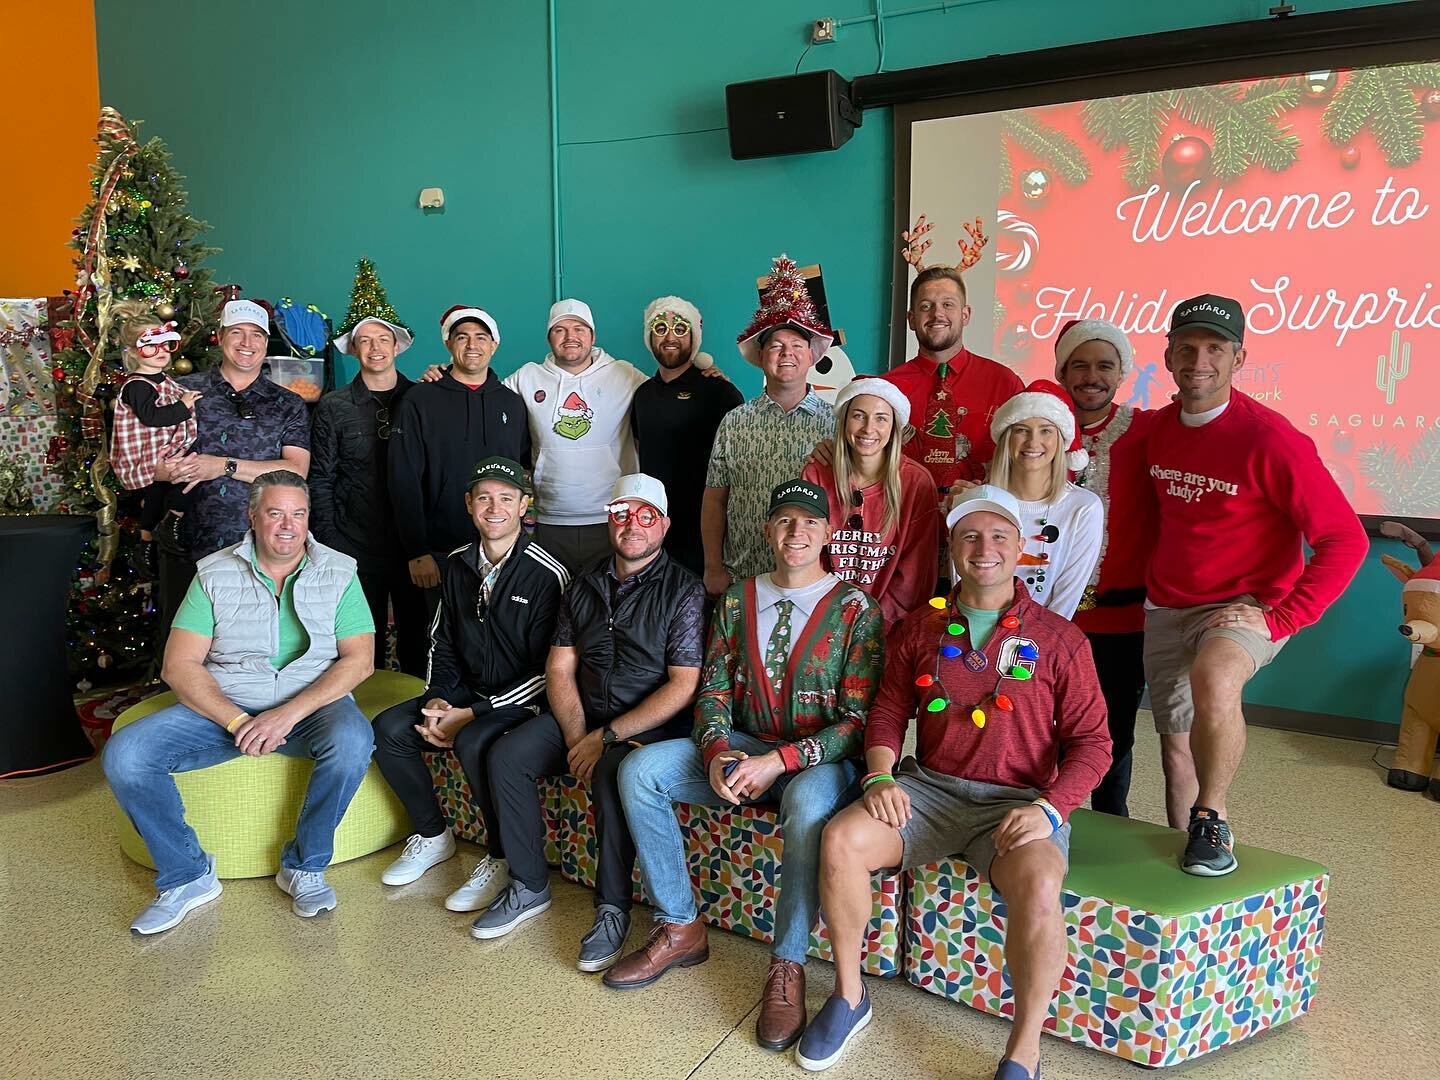 Members of The Saguaros volunteer at the 2022 Children's Cancer Network Holiday Surprises event